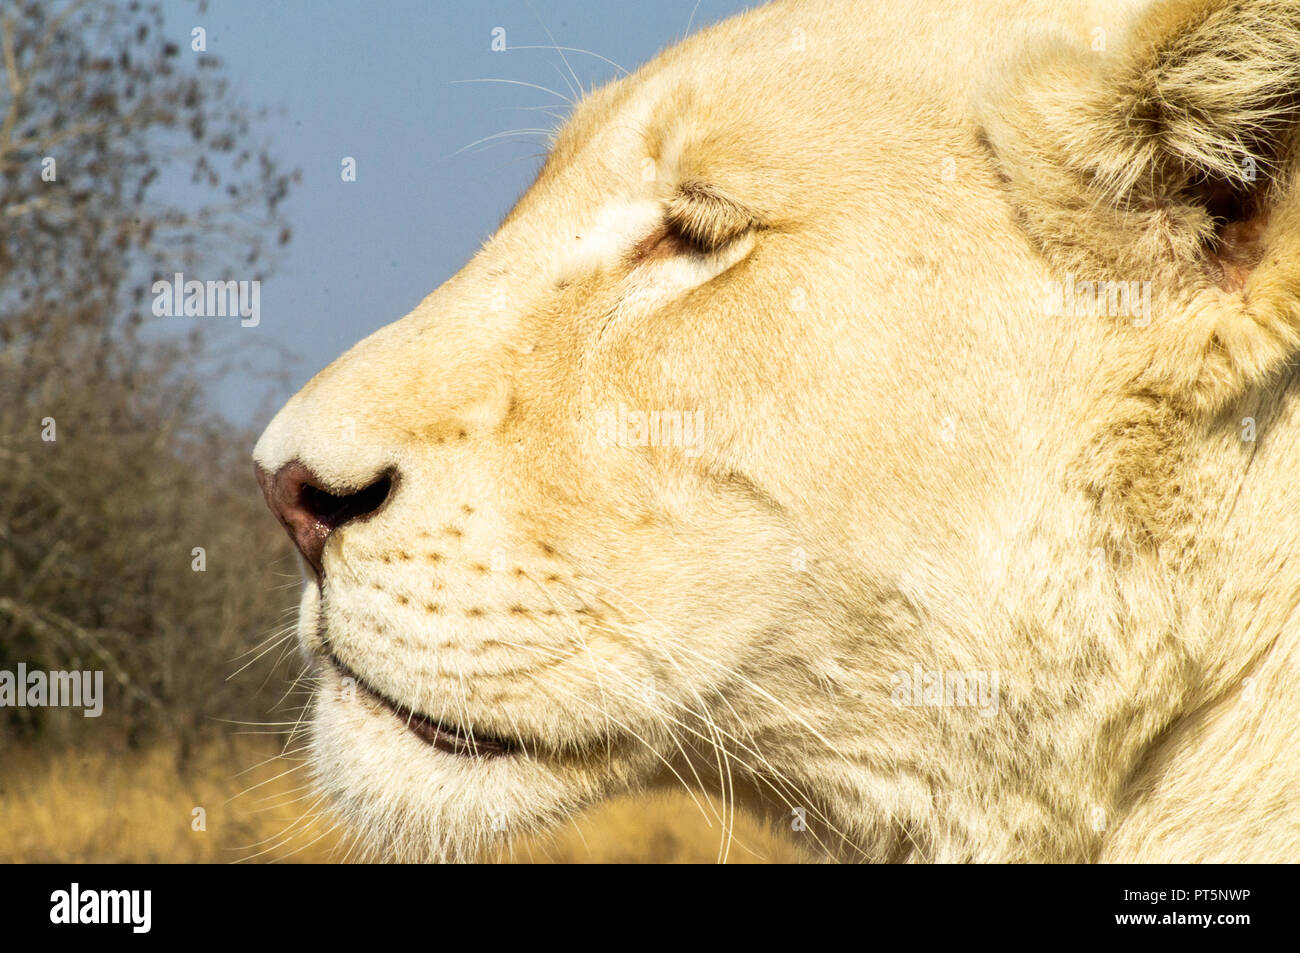 South Africa - Kruger Park - Lions Stock Photo